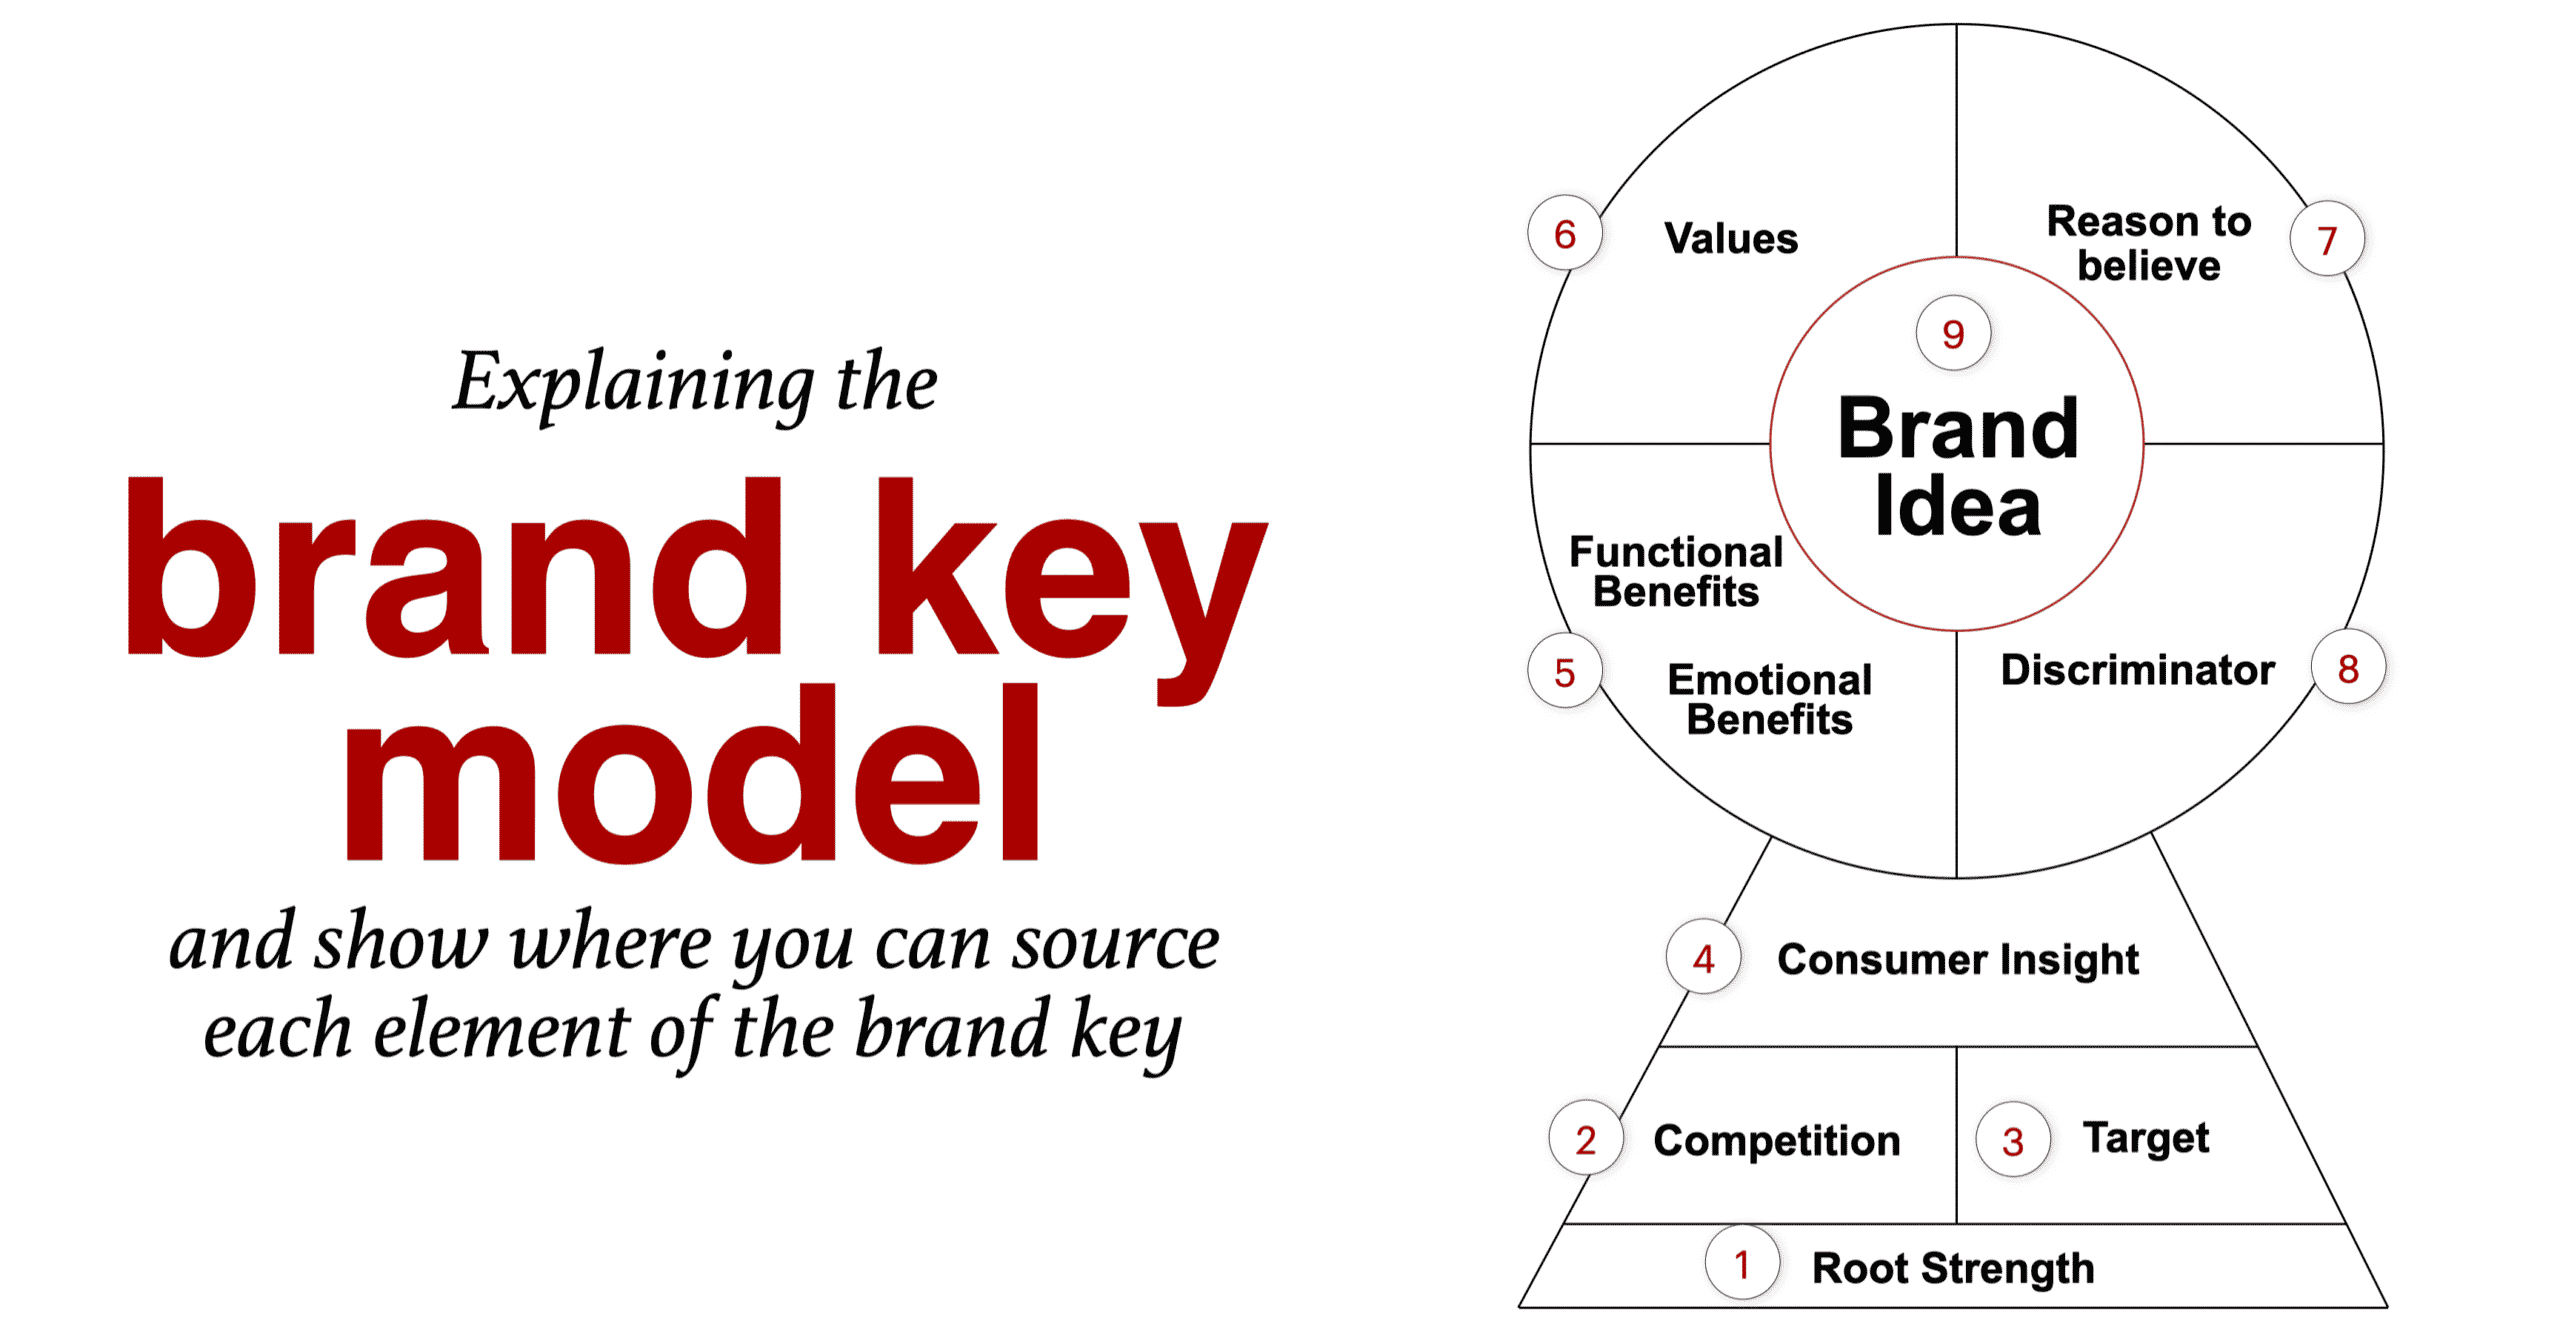 Brand Equity Models: Importance, Measurement, And Success